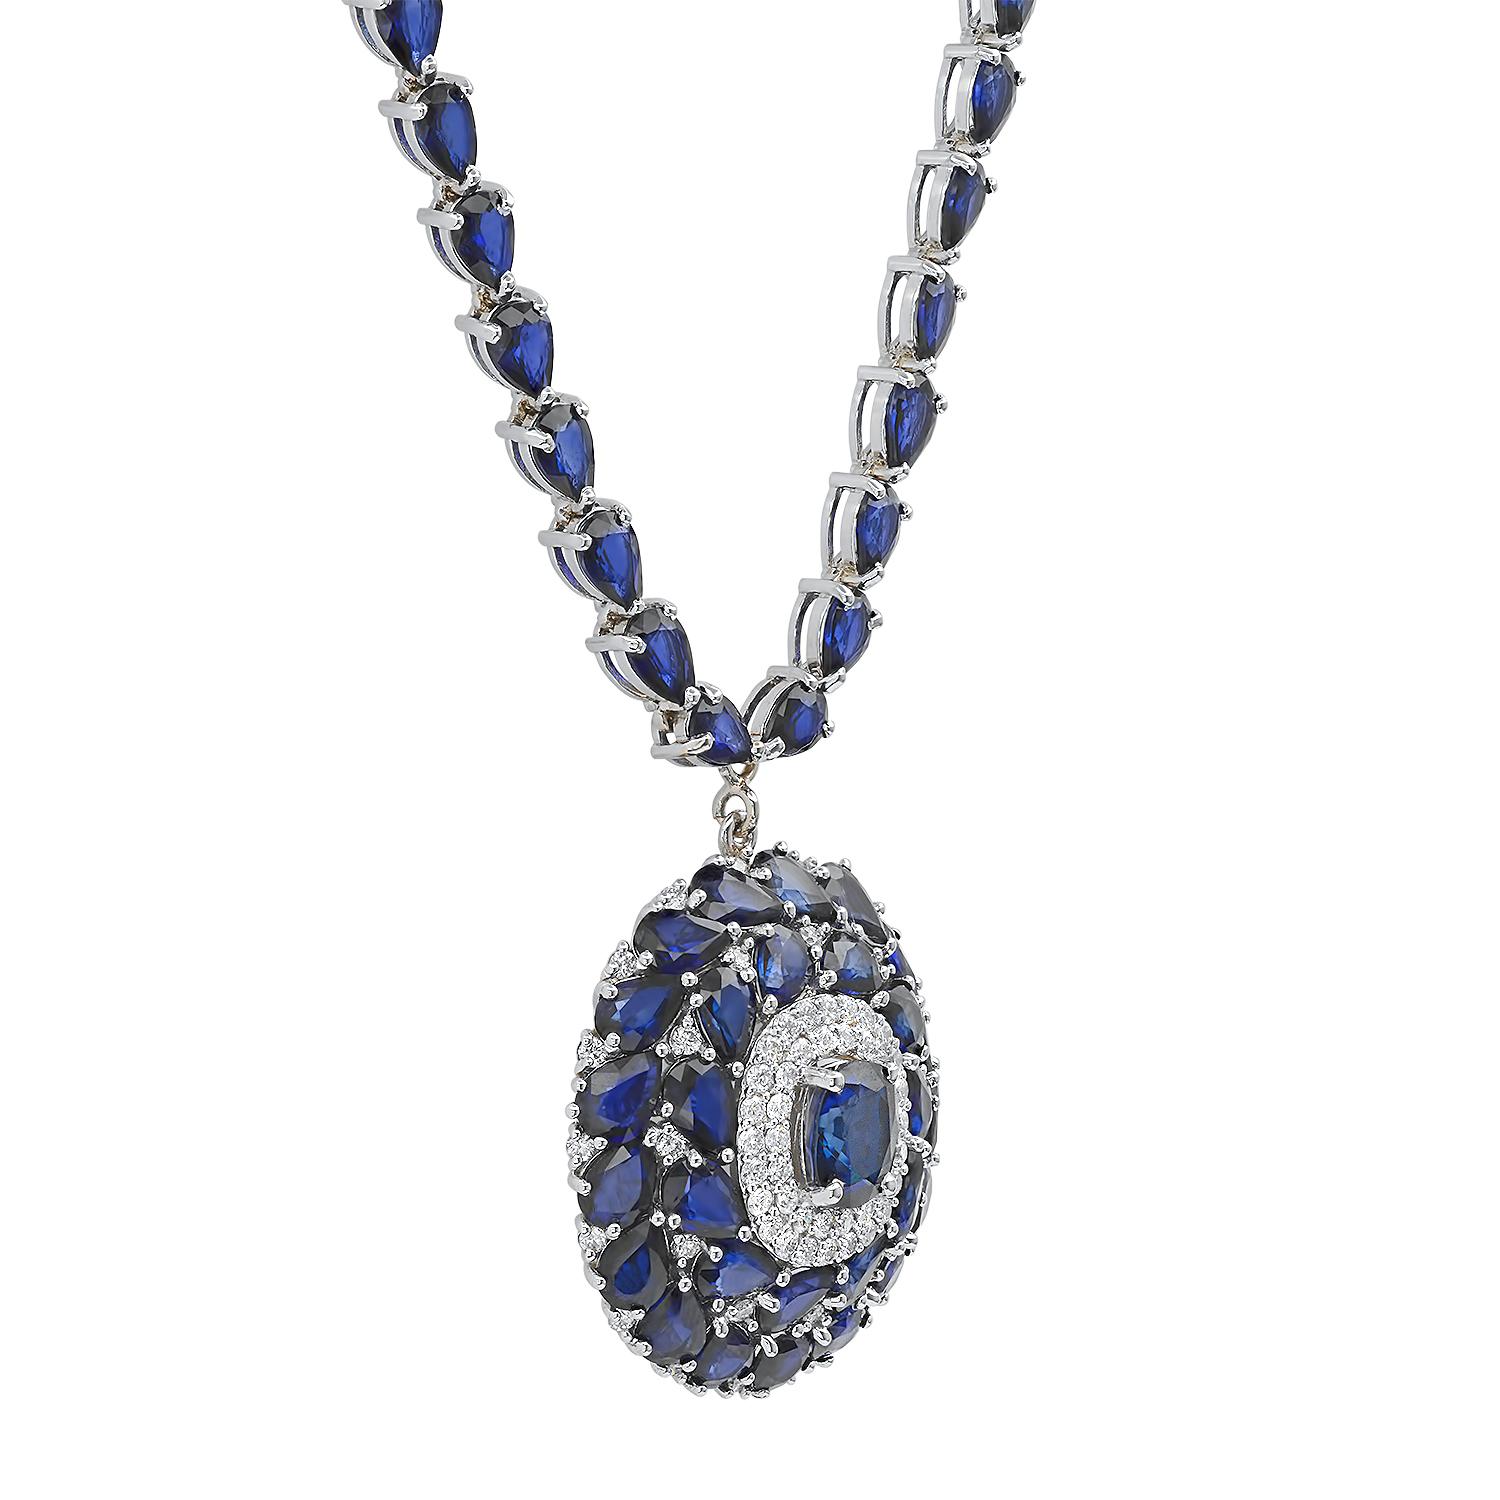 14K White Gold 44.06ct Sapphire and 1.65ct Diamond Necklace